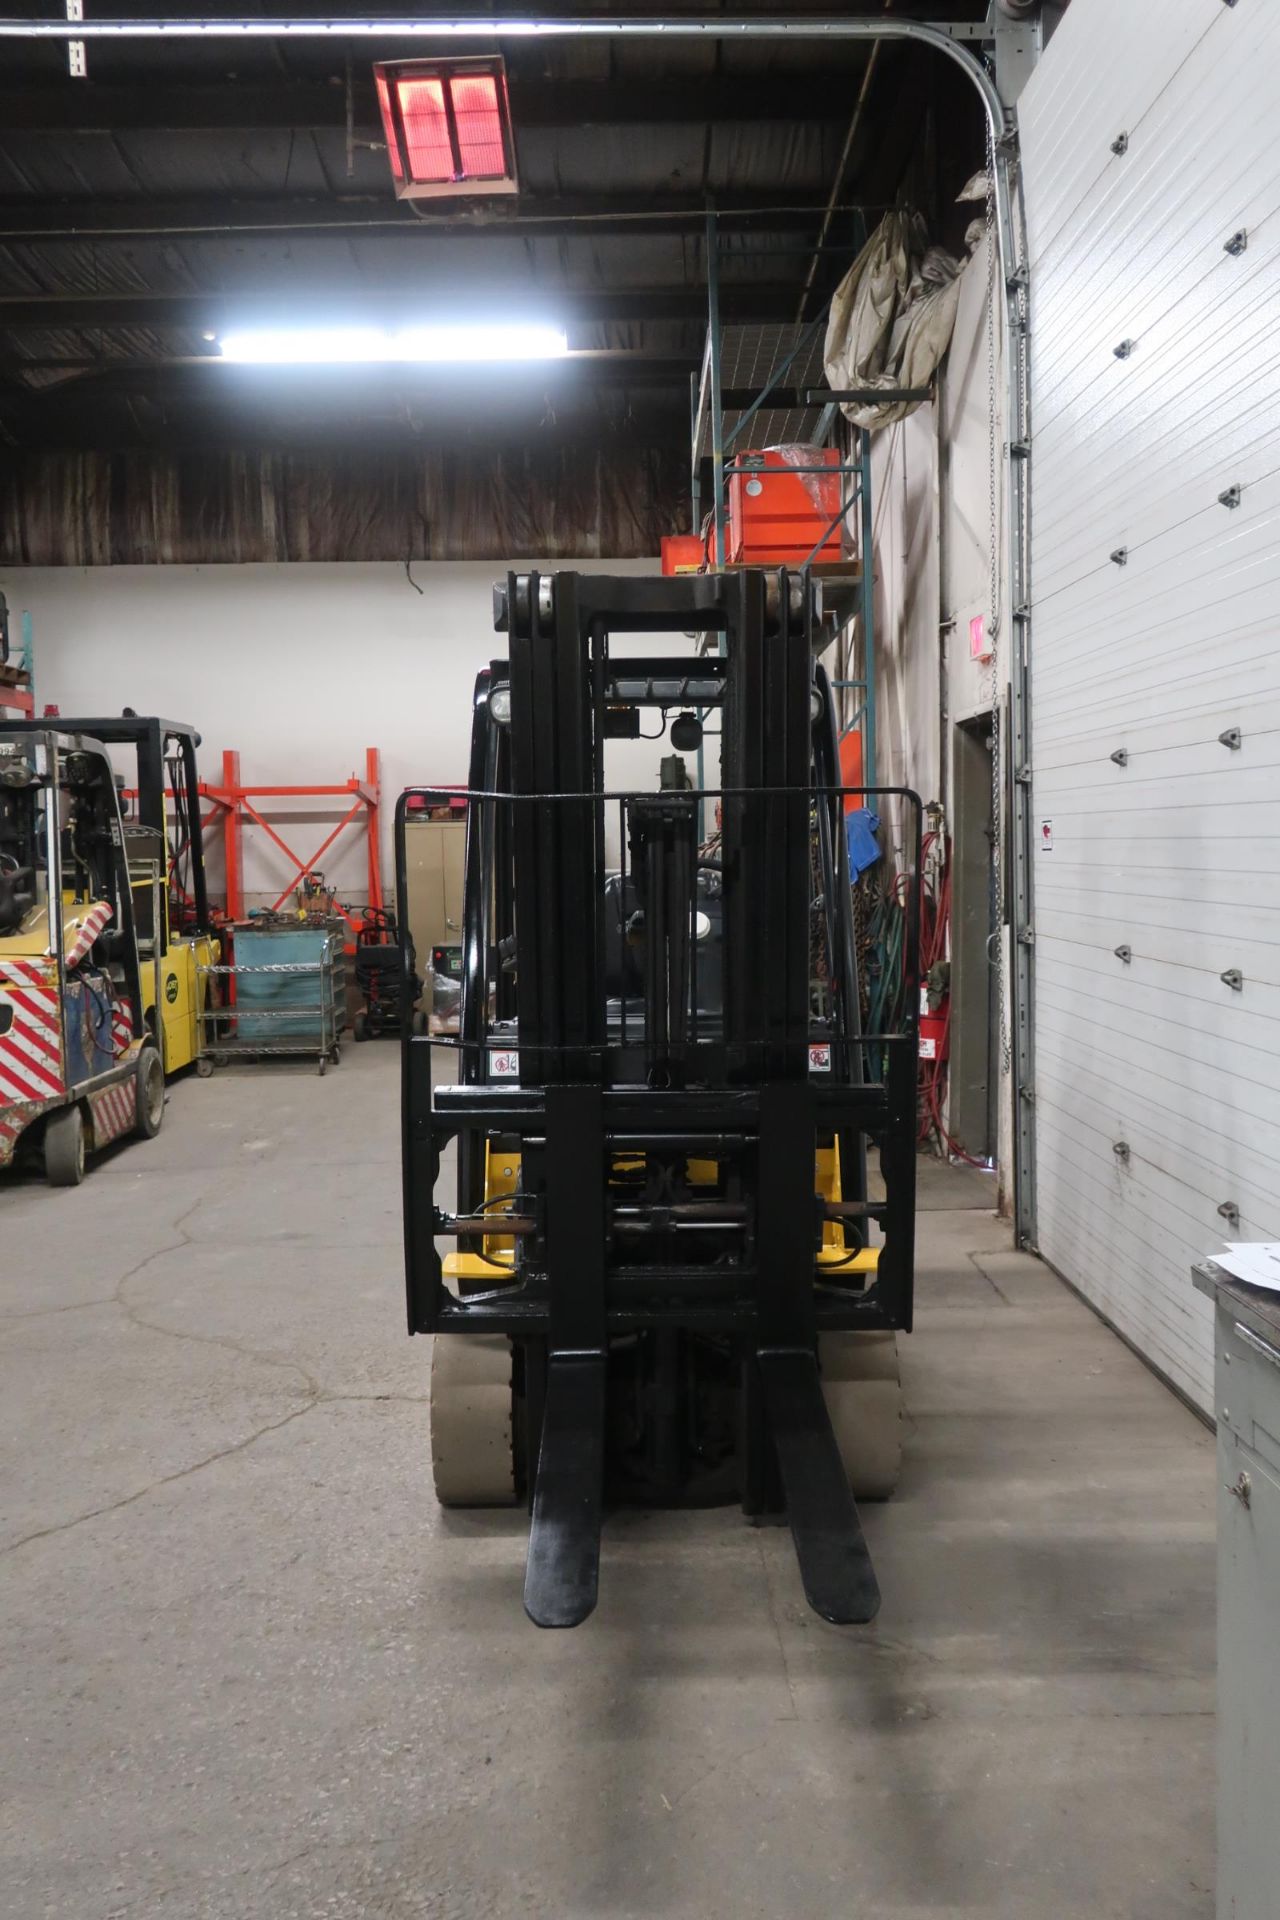 FREE CUSTOMS - 2015 Yale 6000lbs Capacity Forklift with 3-stage mast - LPG (propane) with Fork - Image 2 of 2